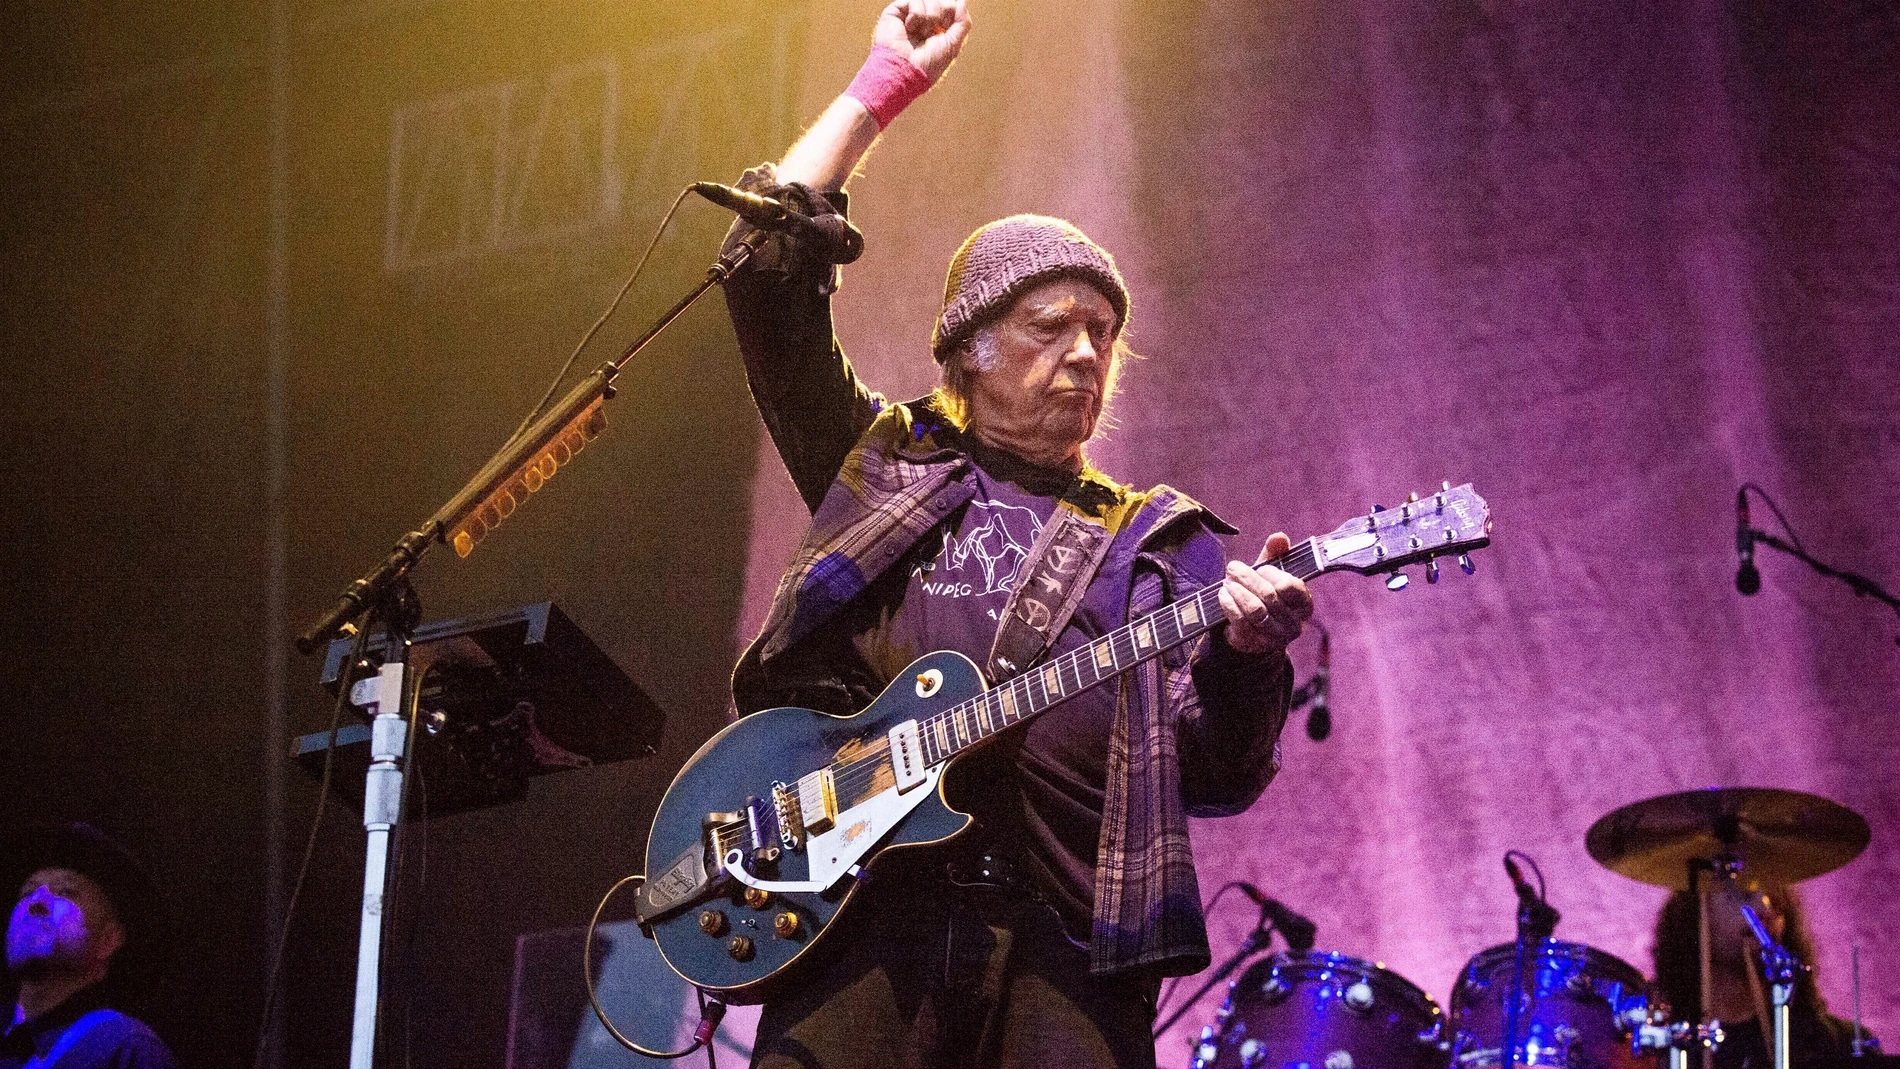 FILE - Neil Young performs at the BottleRock Napa Valley Music Festival at Napa Valley Expo in Napa, Calif., on May 25, 2019. Young offers a ragged and raw live take of his 1990 album "Ragged Glory" with a new album, titled "F##in' Up." (Photo by Amy Harris/Invision/AP, File)